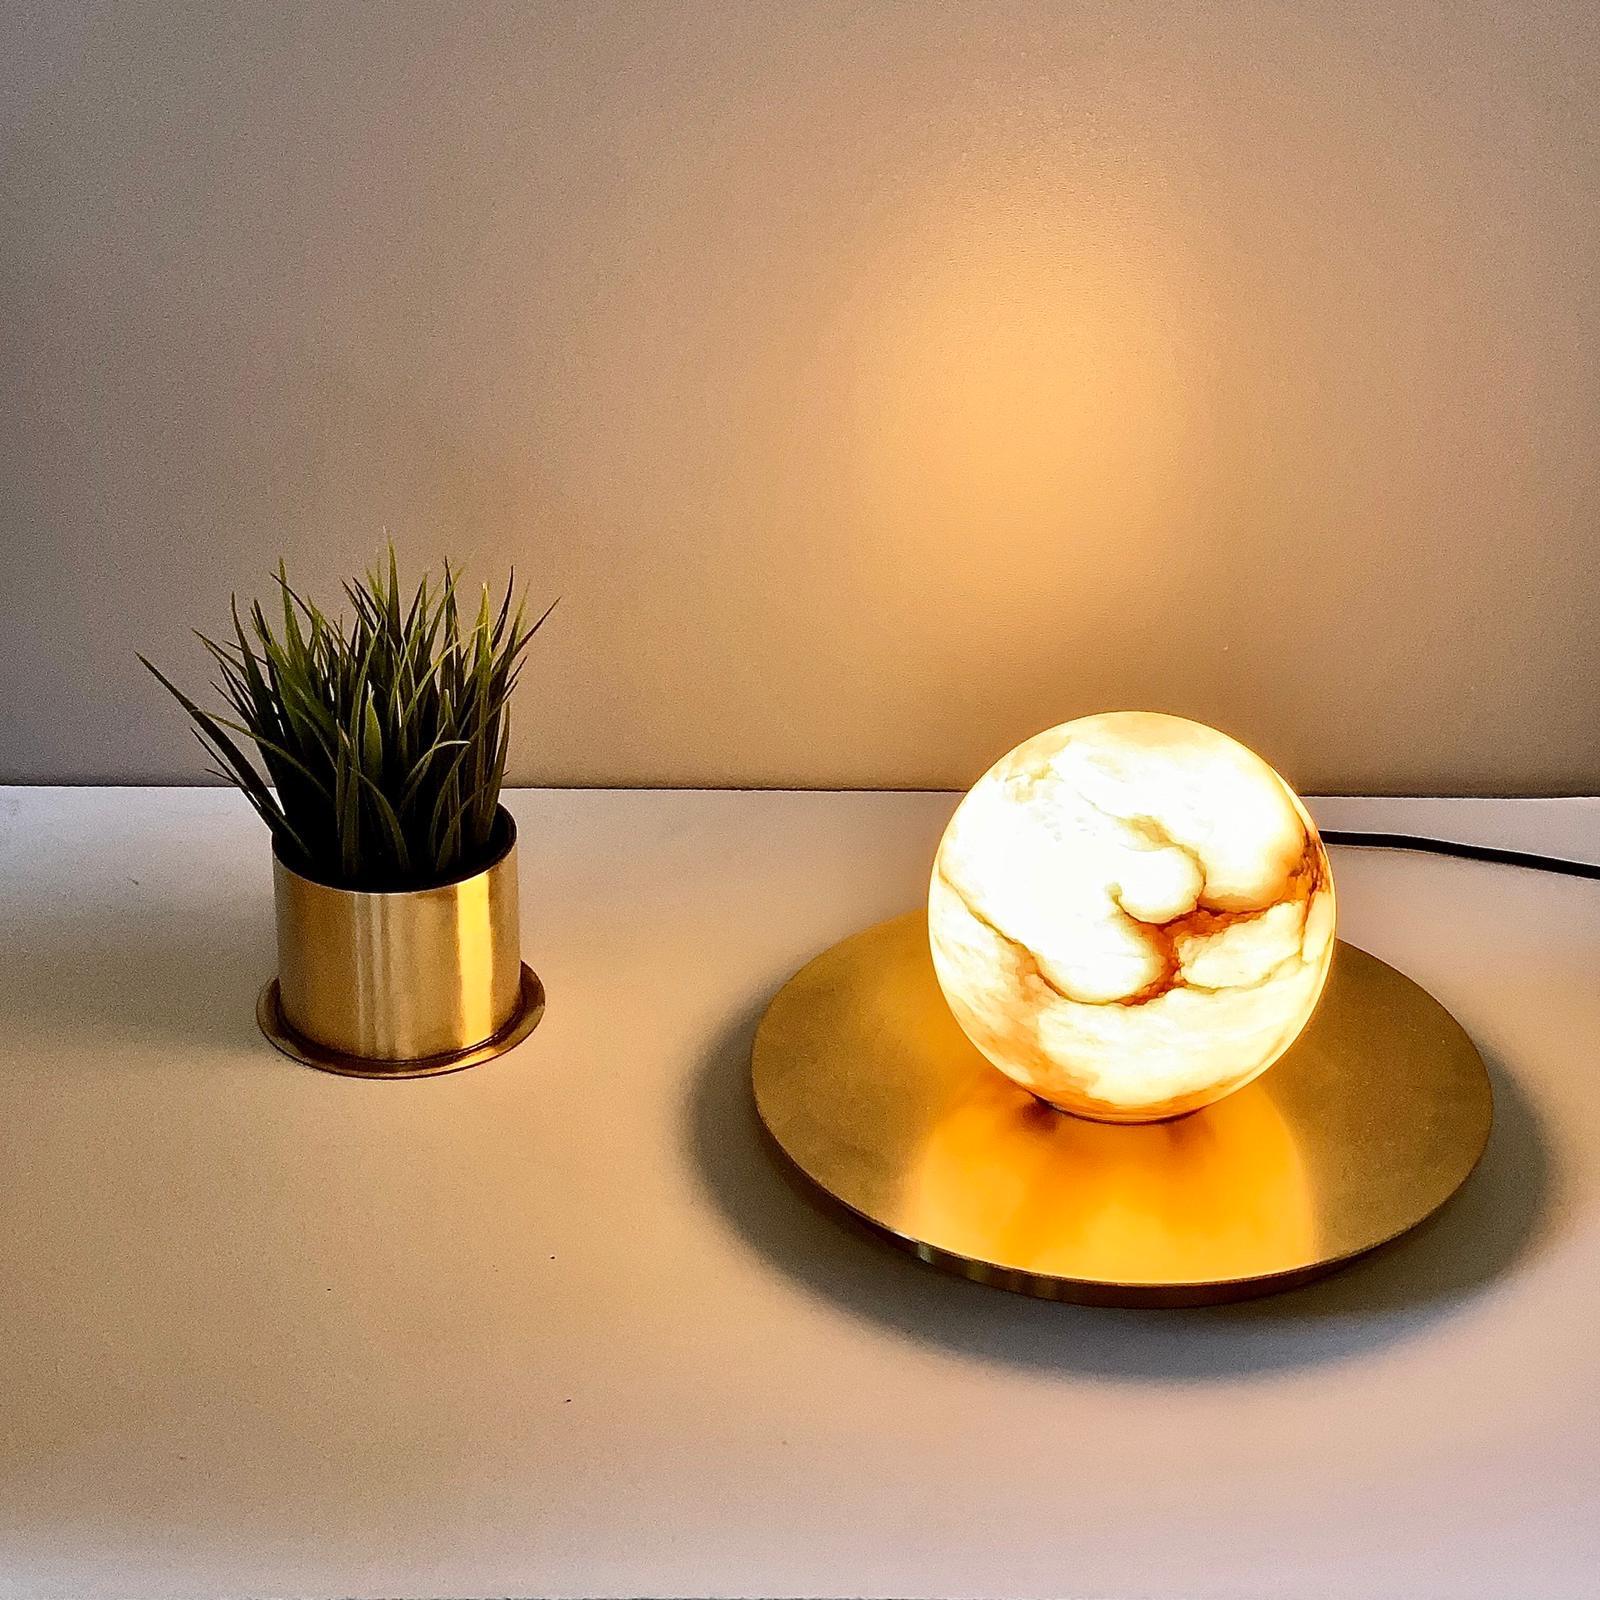 Cosulich interiors in collaboration with Matlight Studio, this organic table lamp, part of the Alabaster Moon collection, entirely handmade in Italy, emphasizes the properties of alabaster as a diffuser, with its warm color and texture of its amber